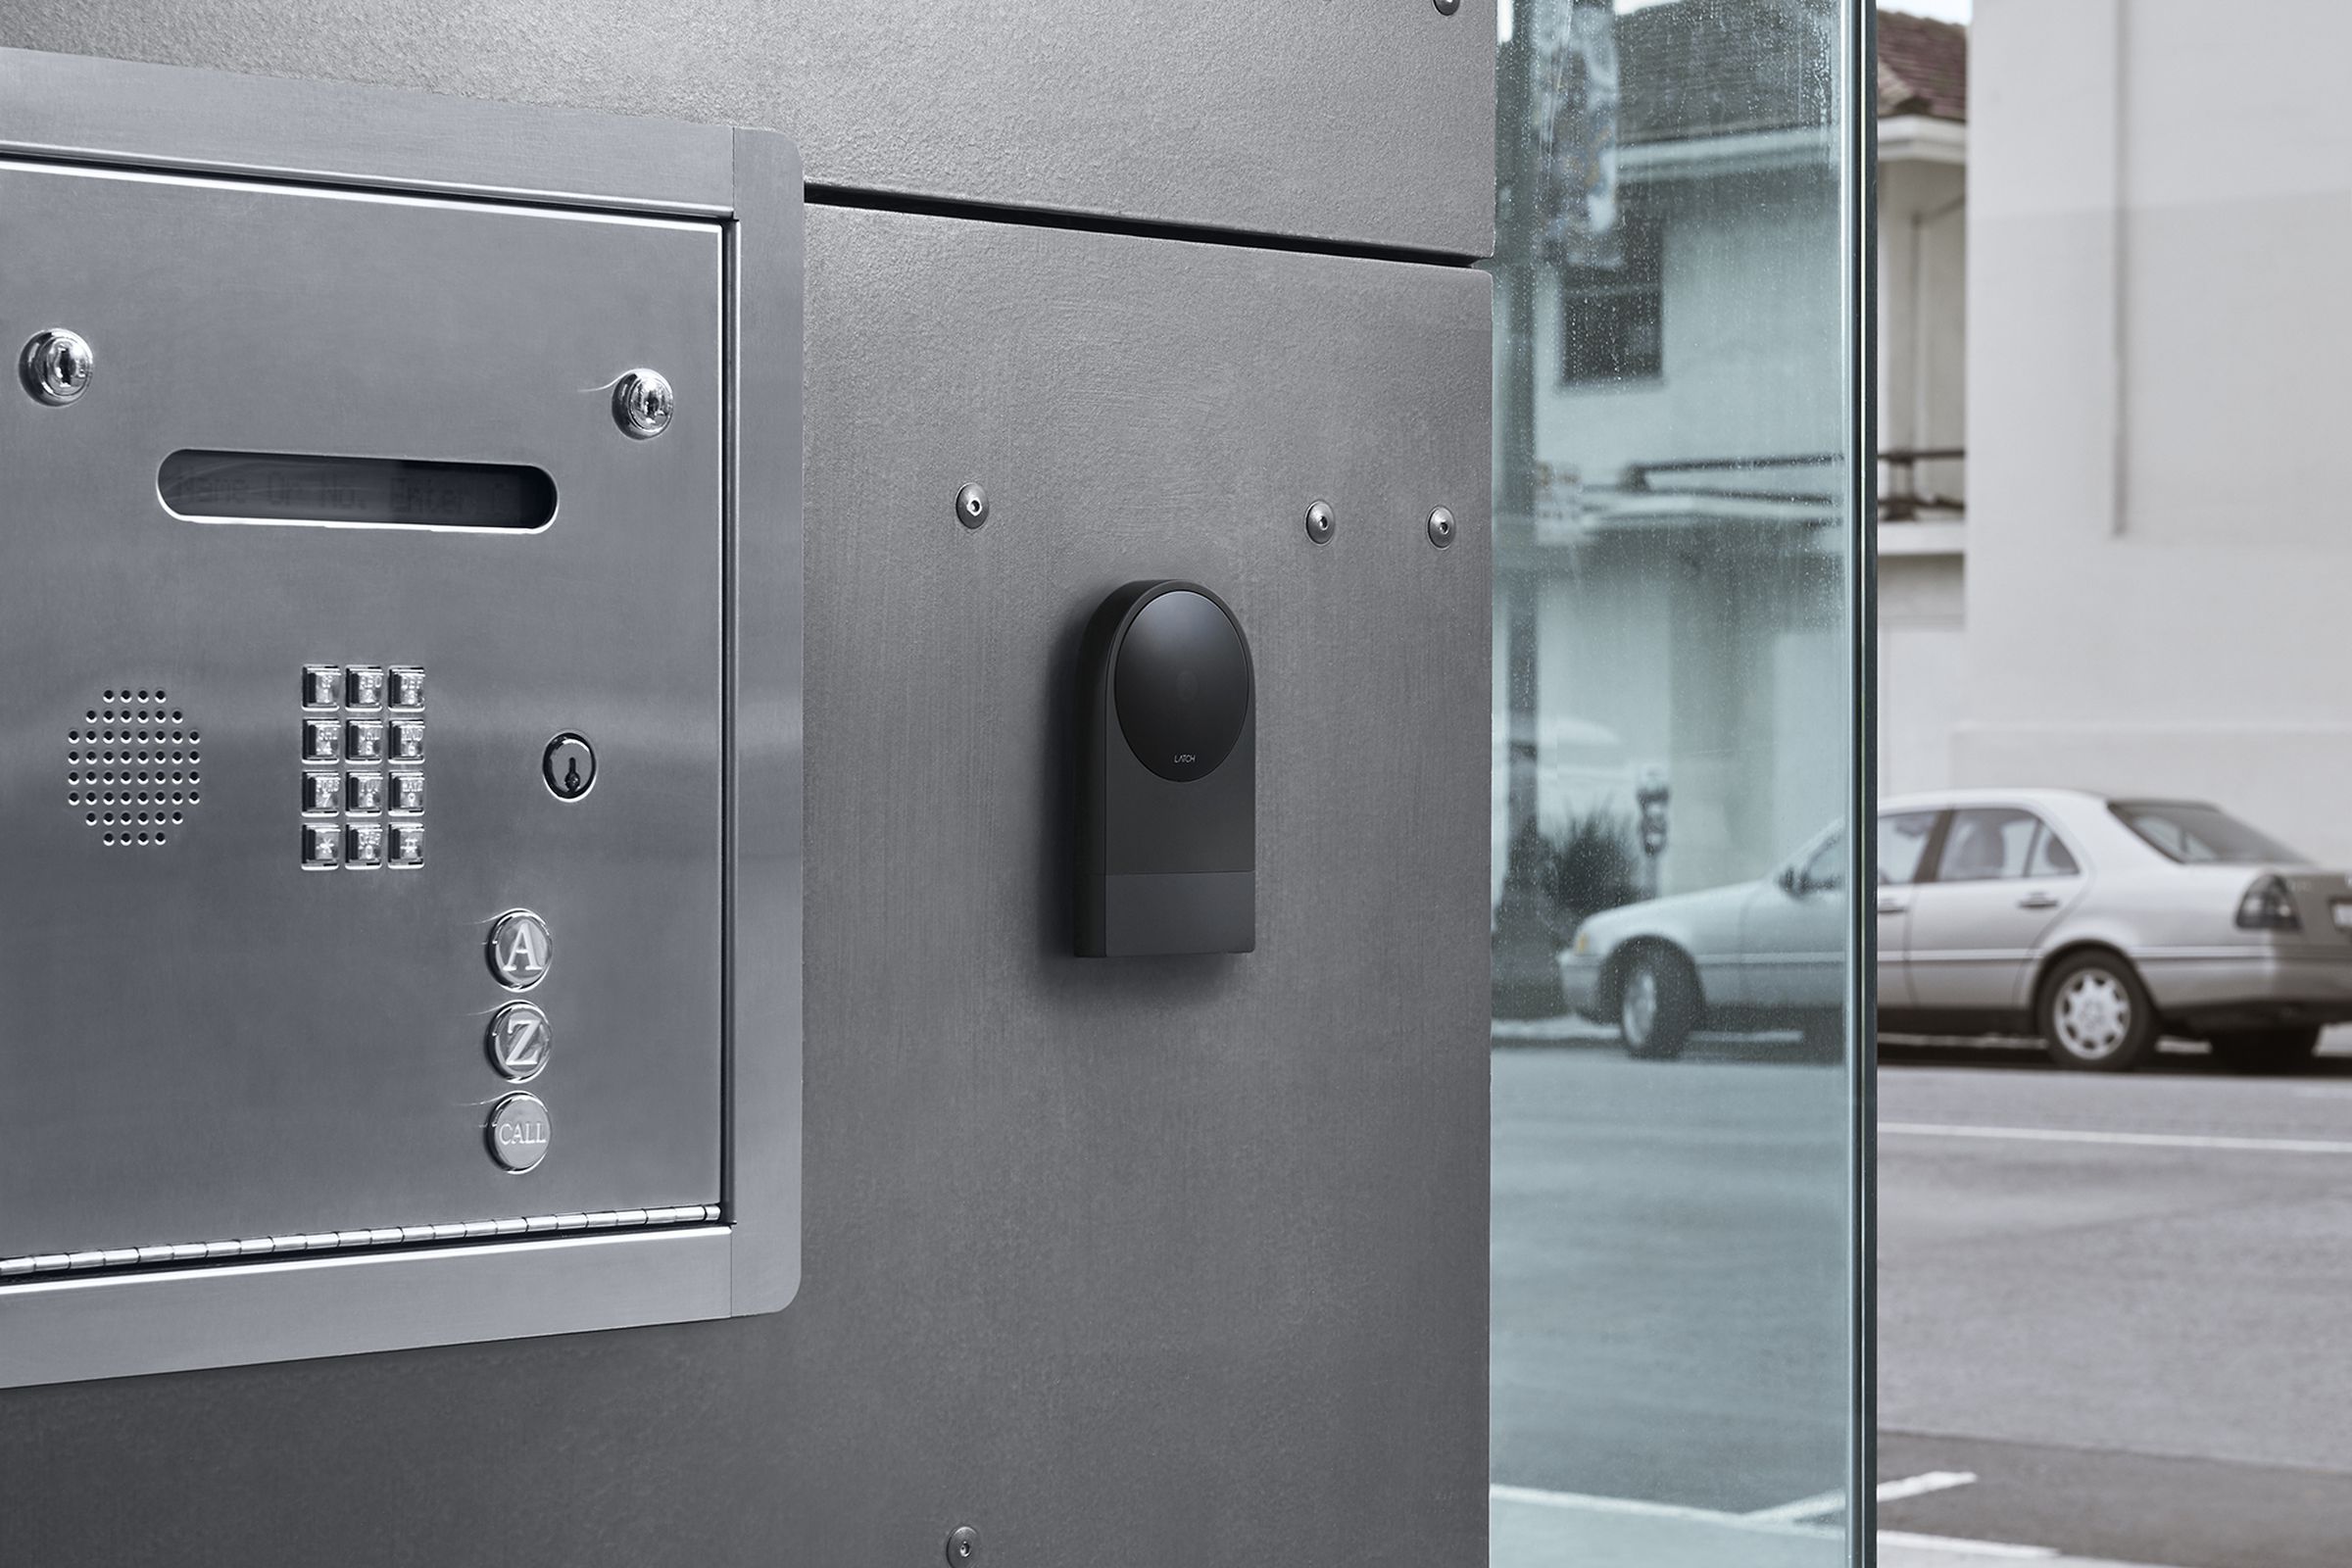 Latch produces smart locks that are designed for apartments and office buildings.